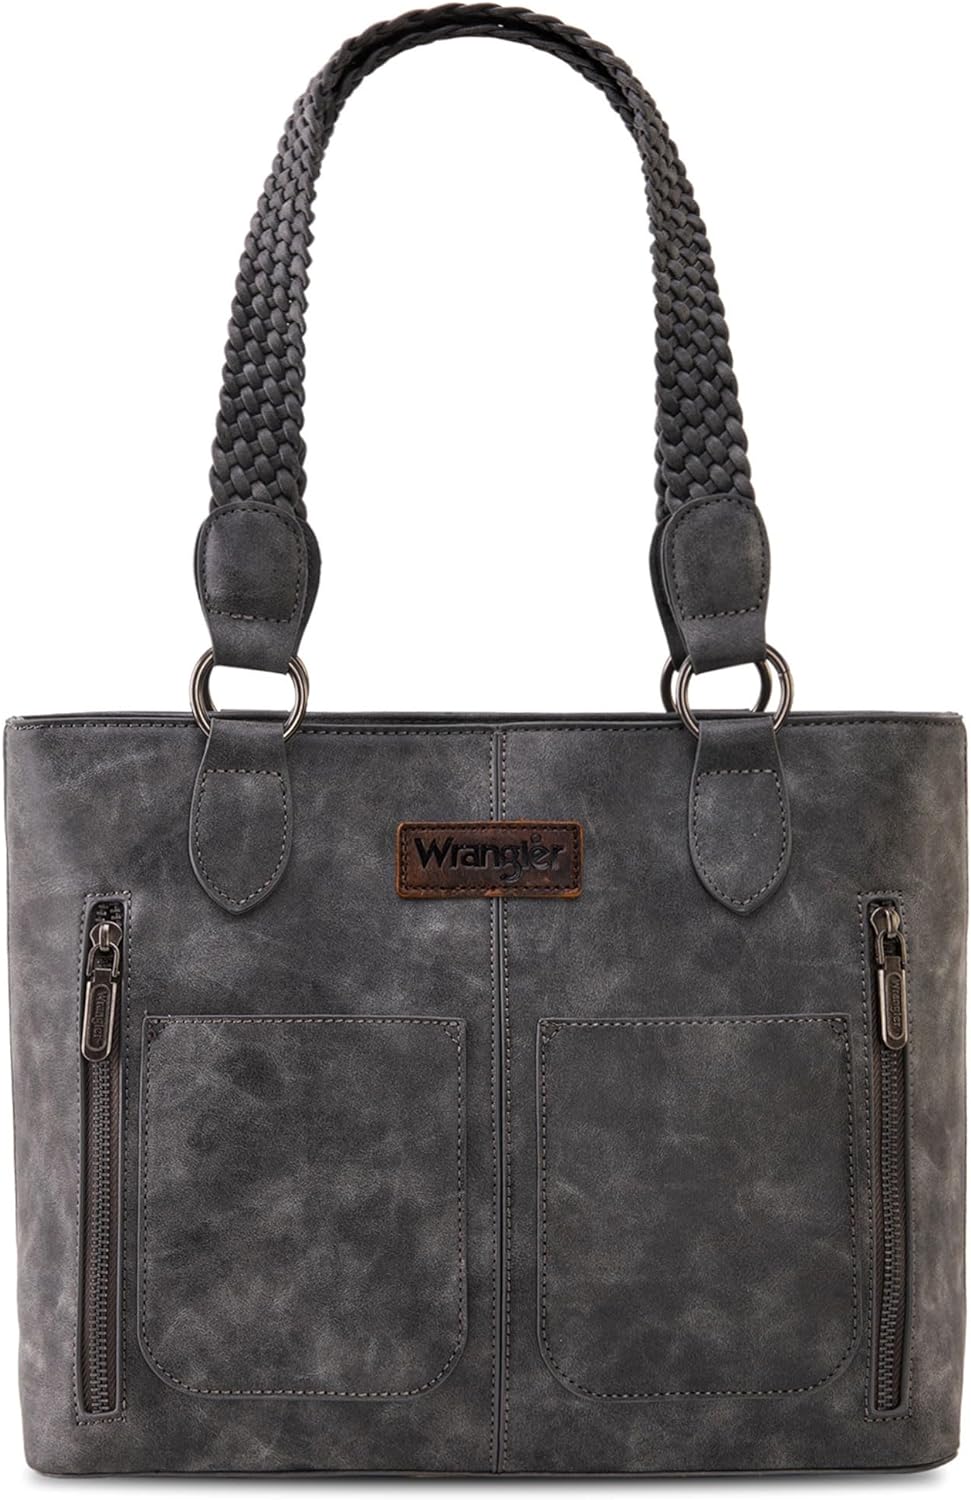 Wrangler Ladies Aztec Concealed Carry Turquoise Tote Bag WG52-G8317TQ –  Wild West Boot Store